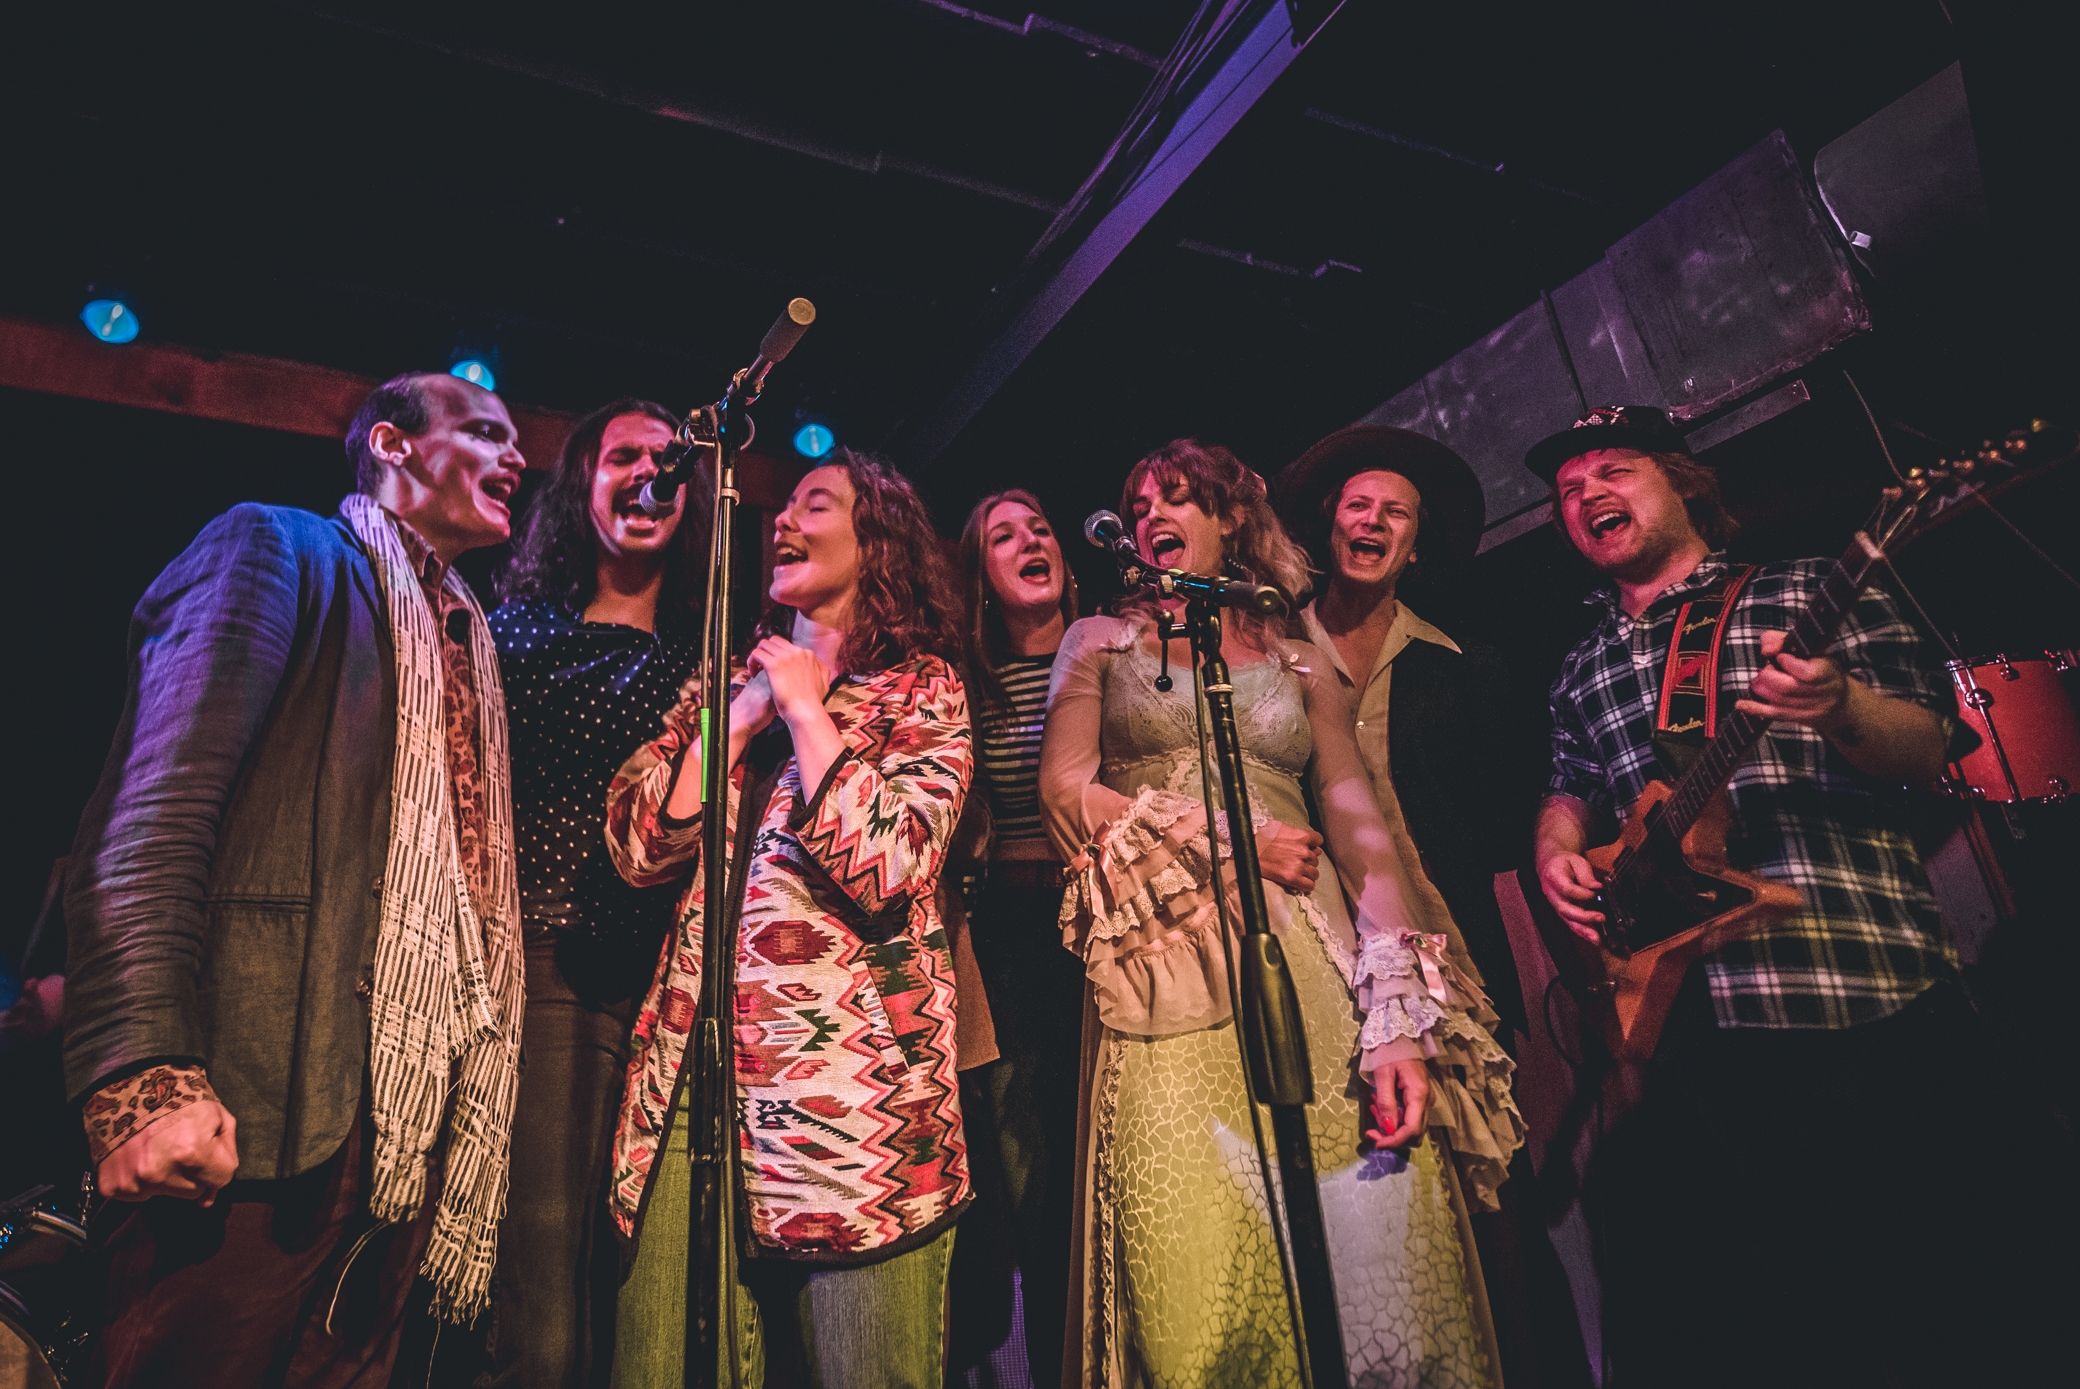 Members from various Austin bands gathered on stage to pay tribute to The Band’s concert documentary,  The Last Waltz  on Nov. 23, 2018 at Barracuda Austin.